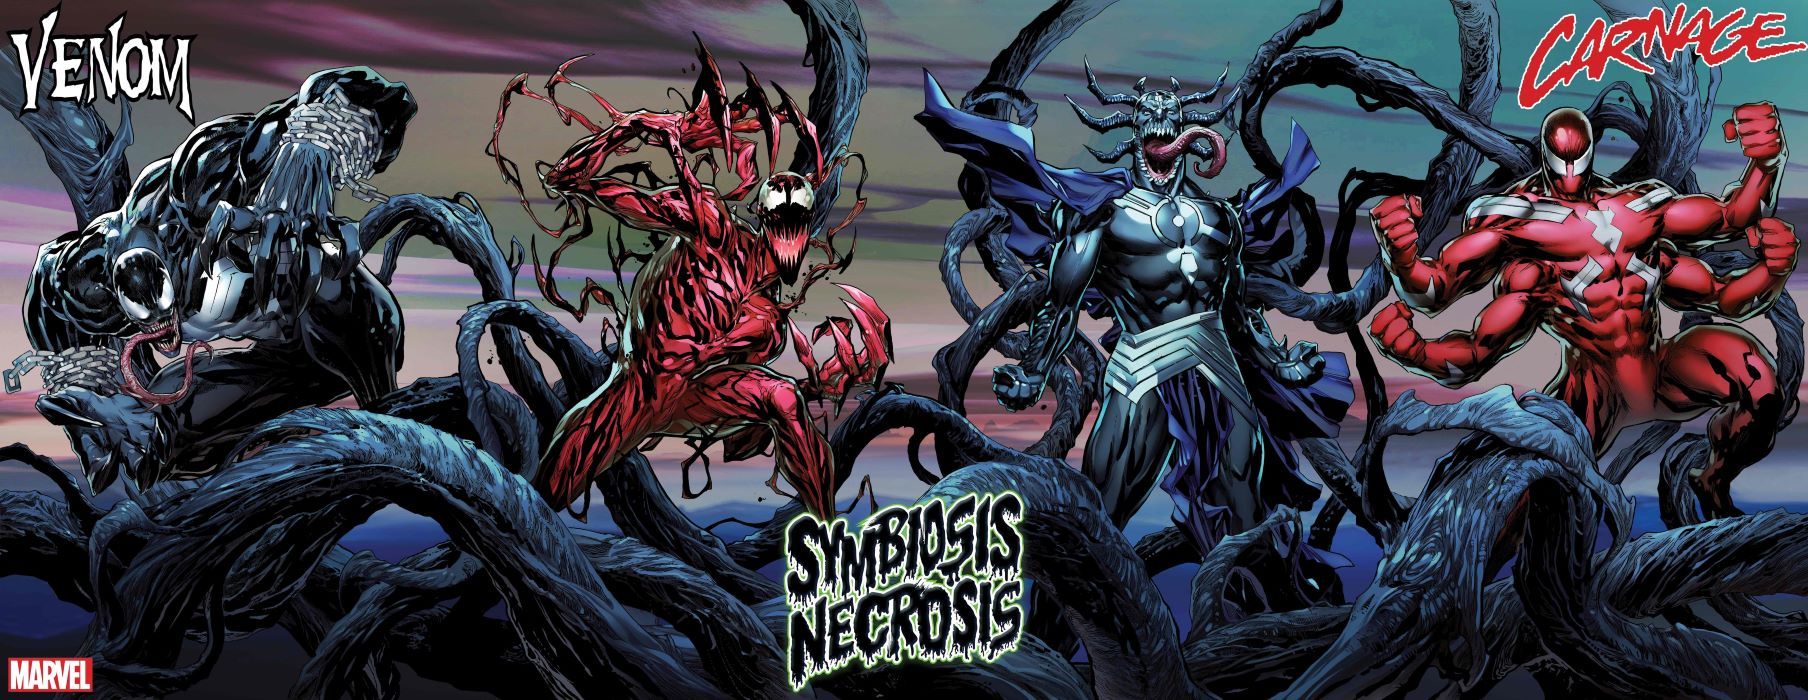 Symbiosis Necrosis Event Confirms the 1 Symbiote Carnage Is Scared of (& It’s Not Venom)